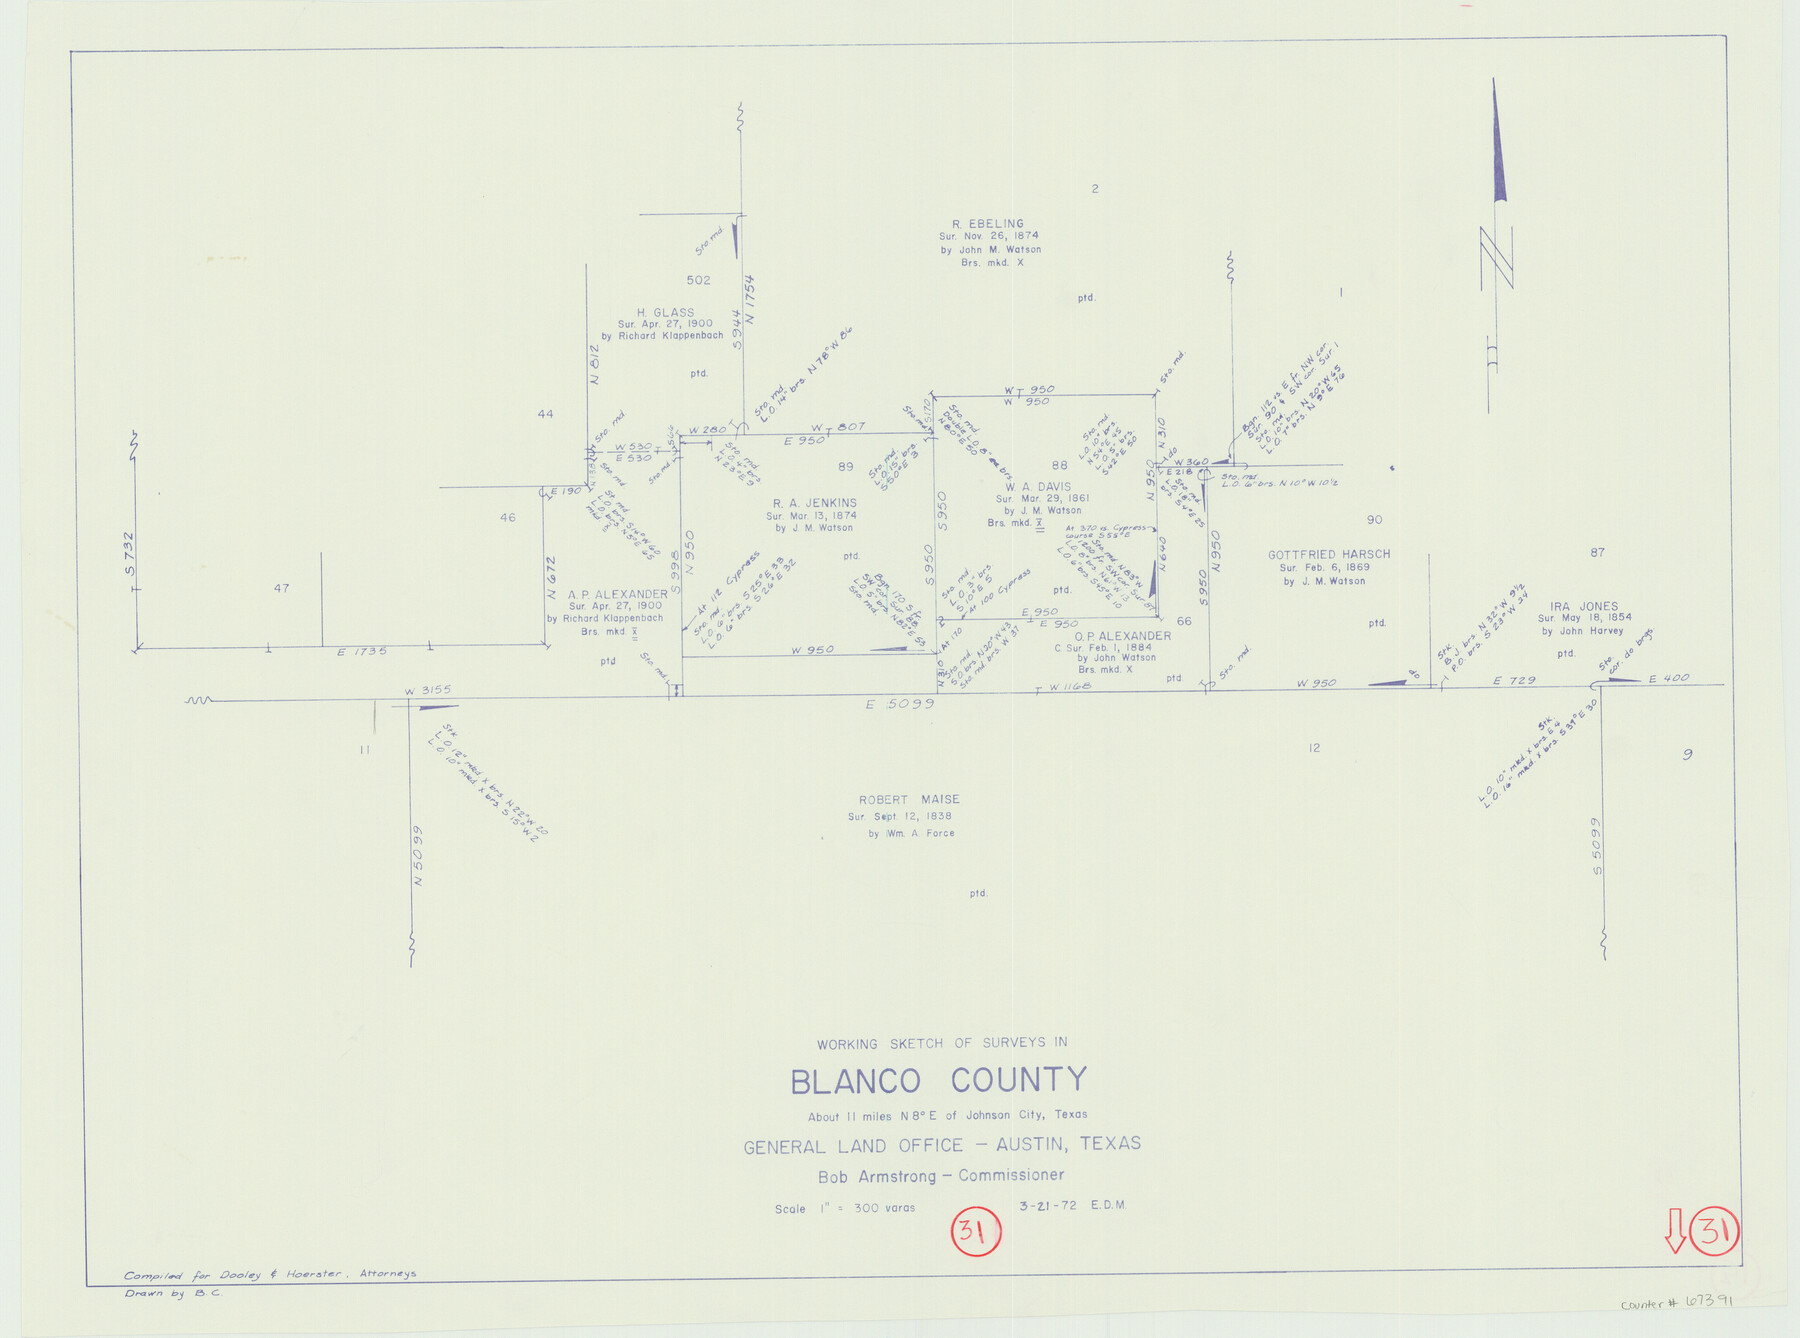 67391, Blanco County Working Sketch 31, General Map Collection